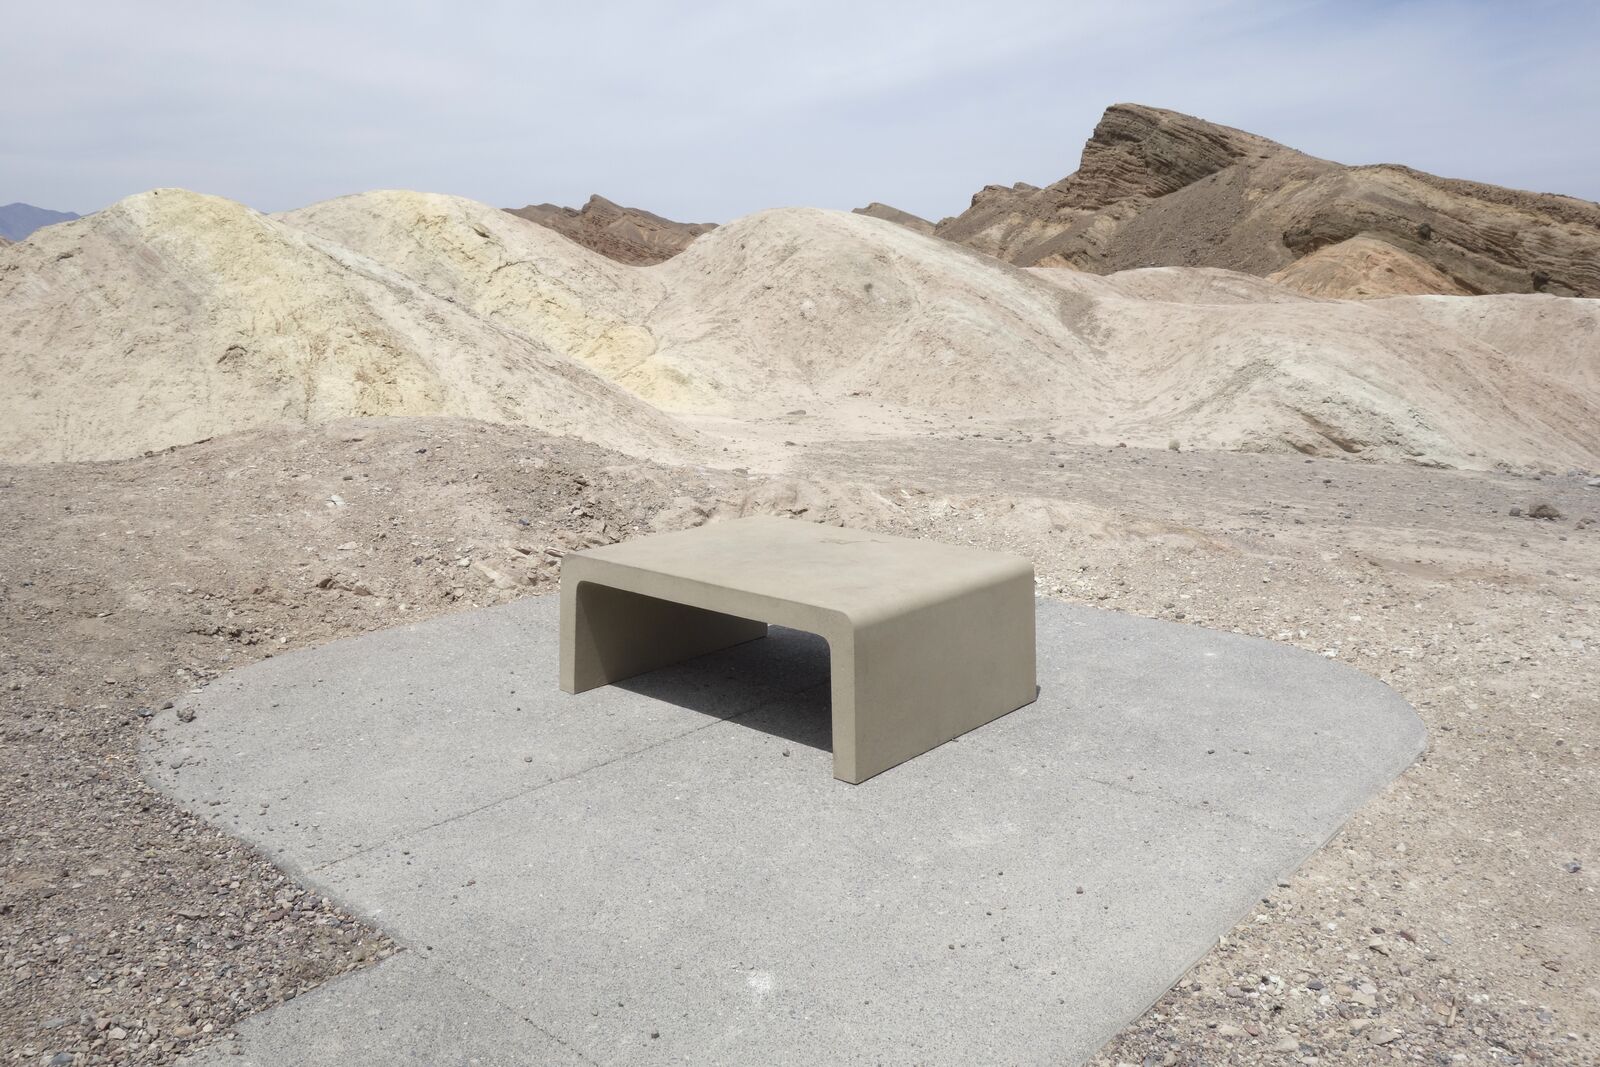 Photograph: a minimalist concrete bench on a rounded patch of concrete, surrounded by a rocky, mountain vista. Everything is very beige, the sky is pale blue.